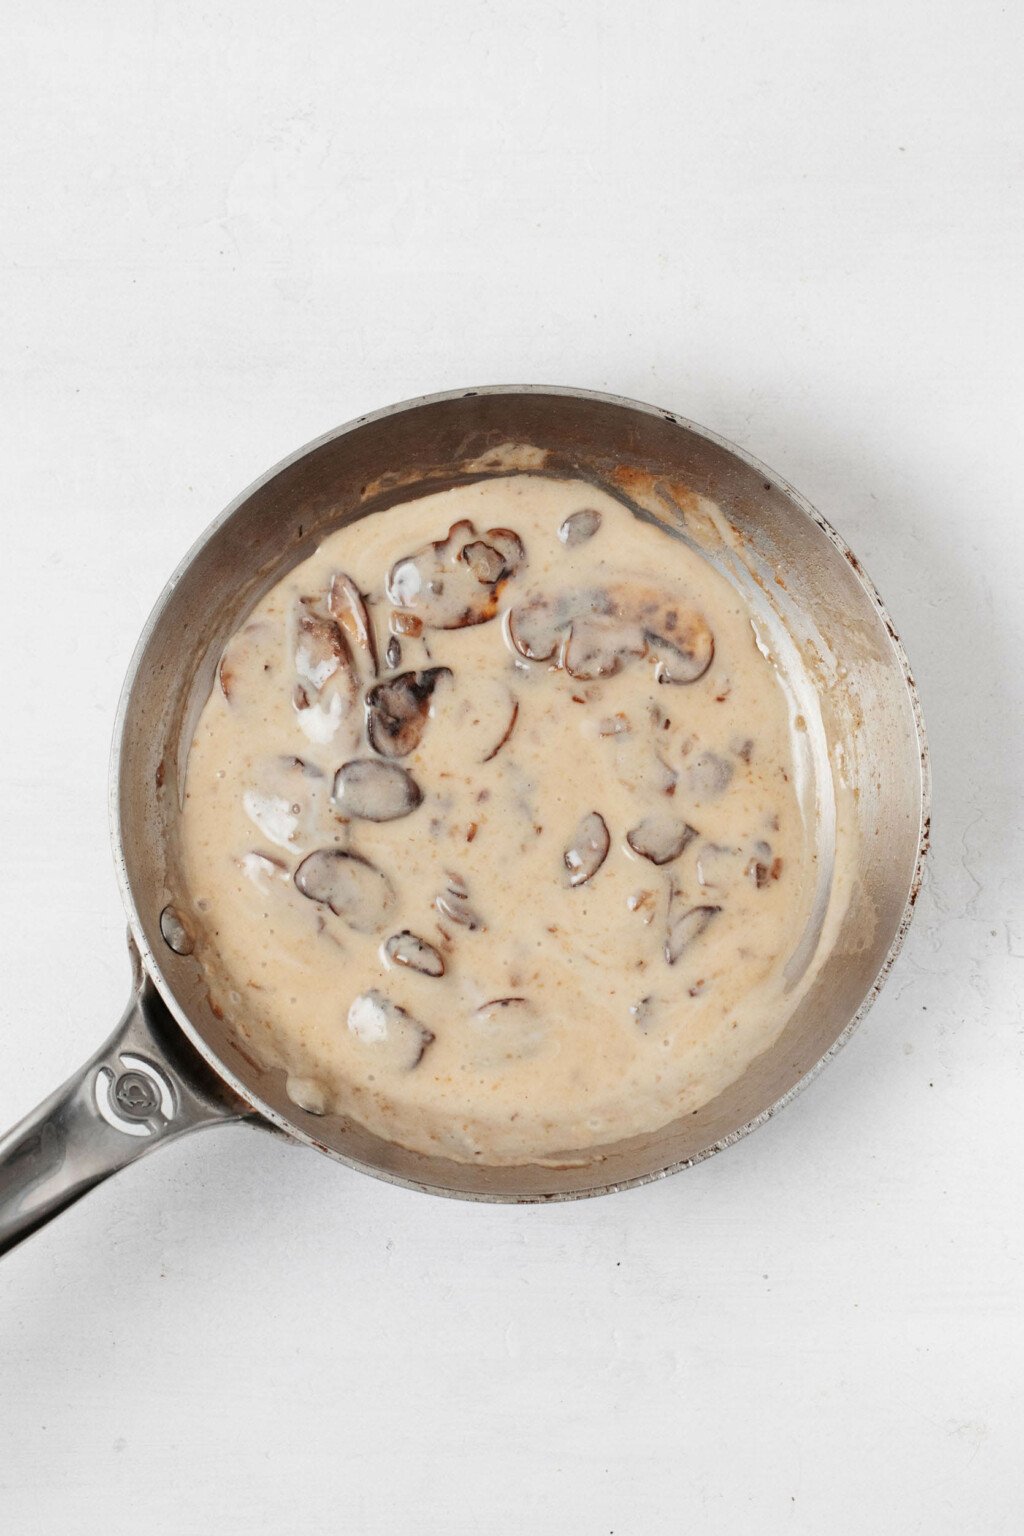 A small, stainless steel frying pan is being used to make a mushroom gravy.